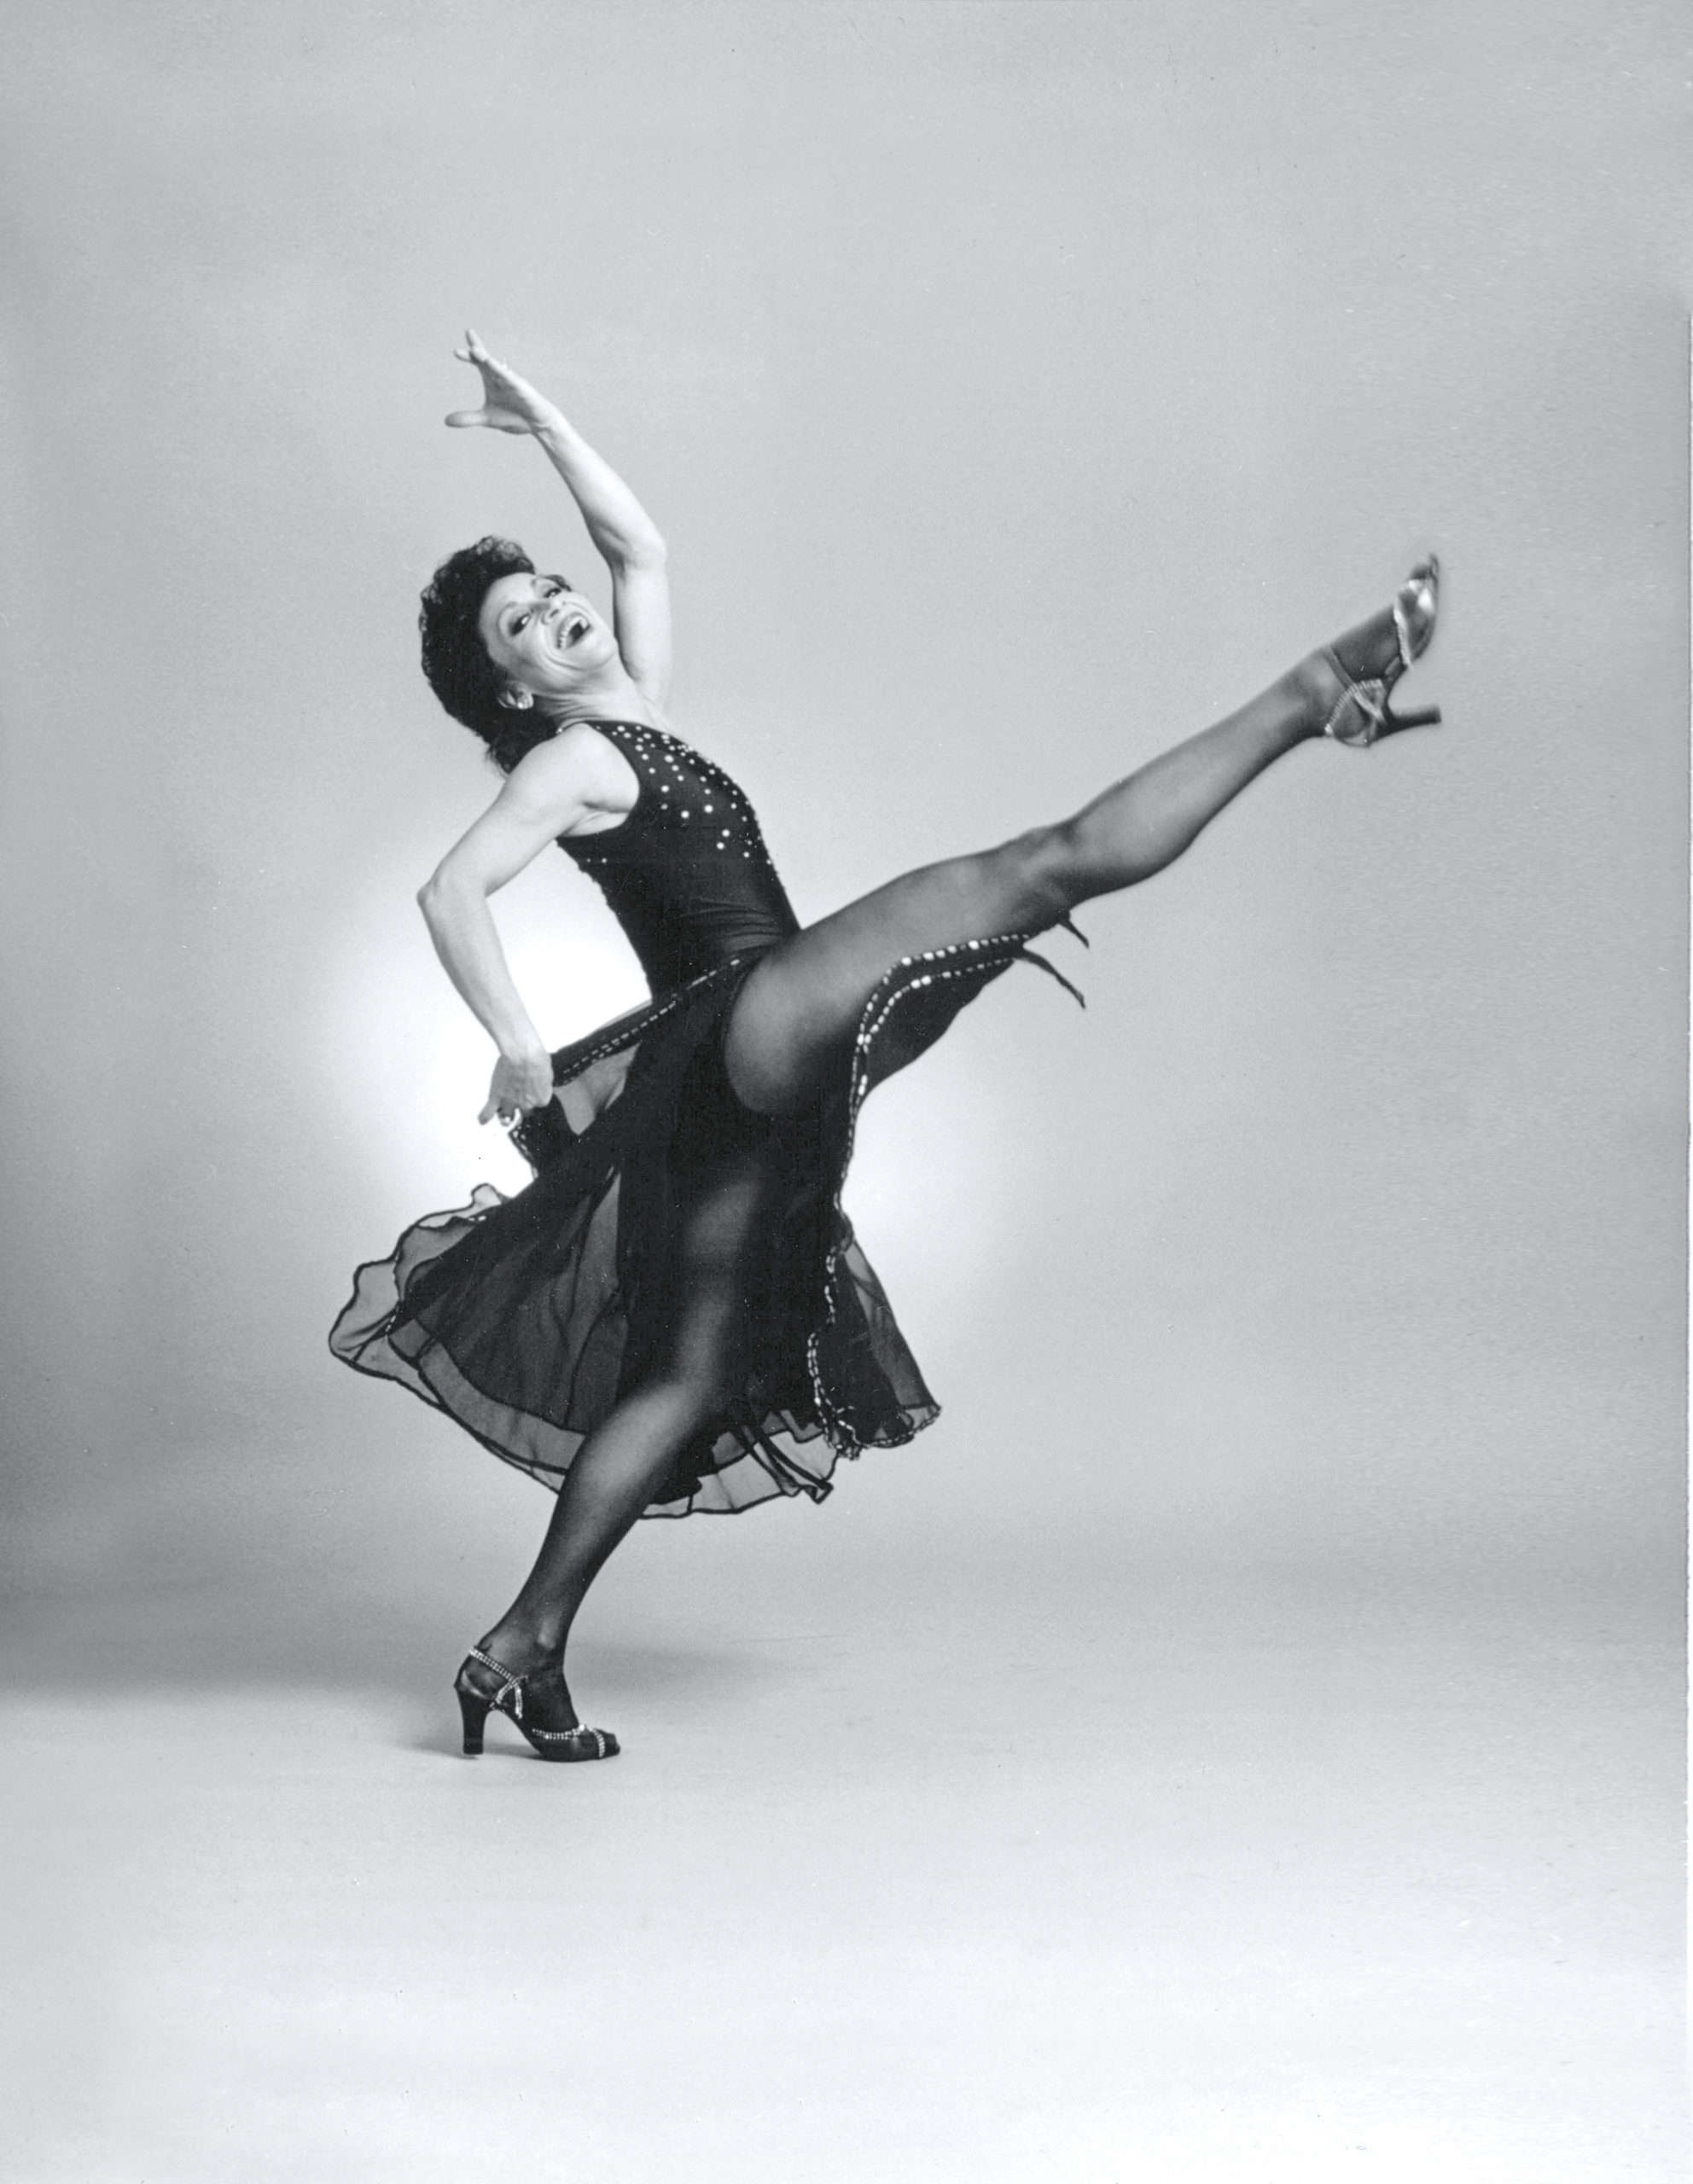 In a black and white image, Chita Rivera grins broadly as she moves through a shallow layout. Her back arm is curved overhead, the other flick her long skirt back. She wears a fitted bodice, flowing skirt, dark tights, and heels.